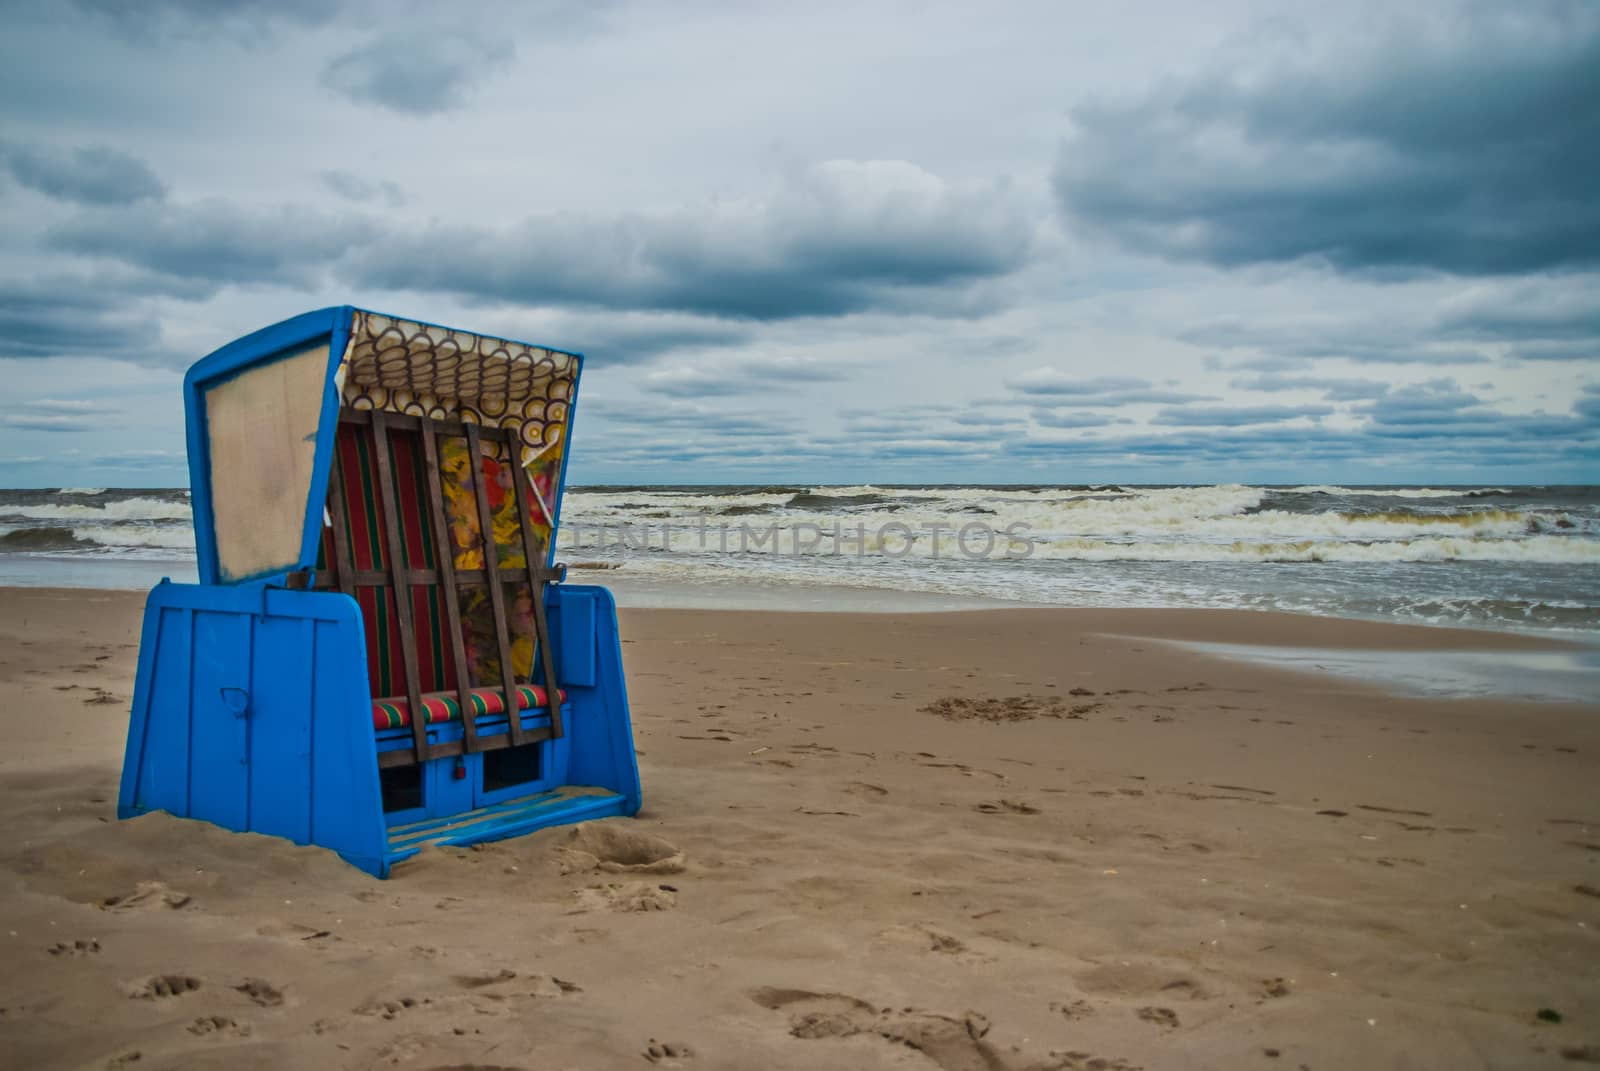 Beach chair at the eastern sea of Germany during summer storm